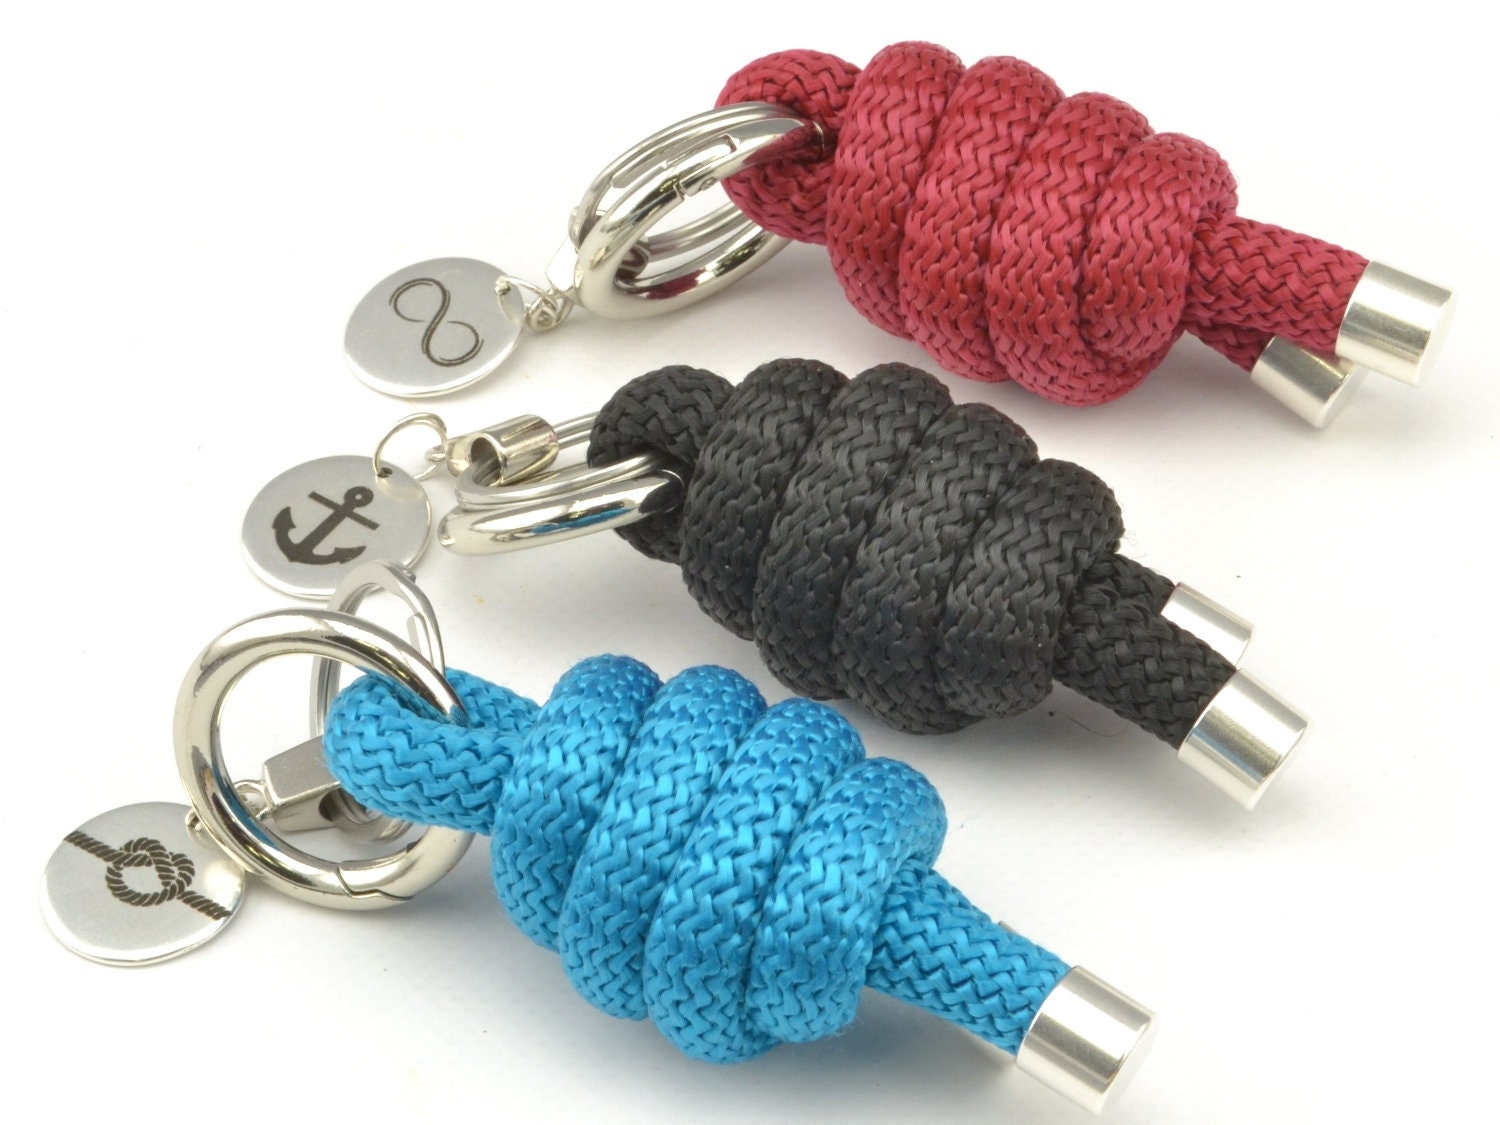 Five Oceans Nautical Braided Rope Keychain FO-3038 